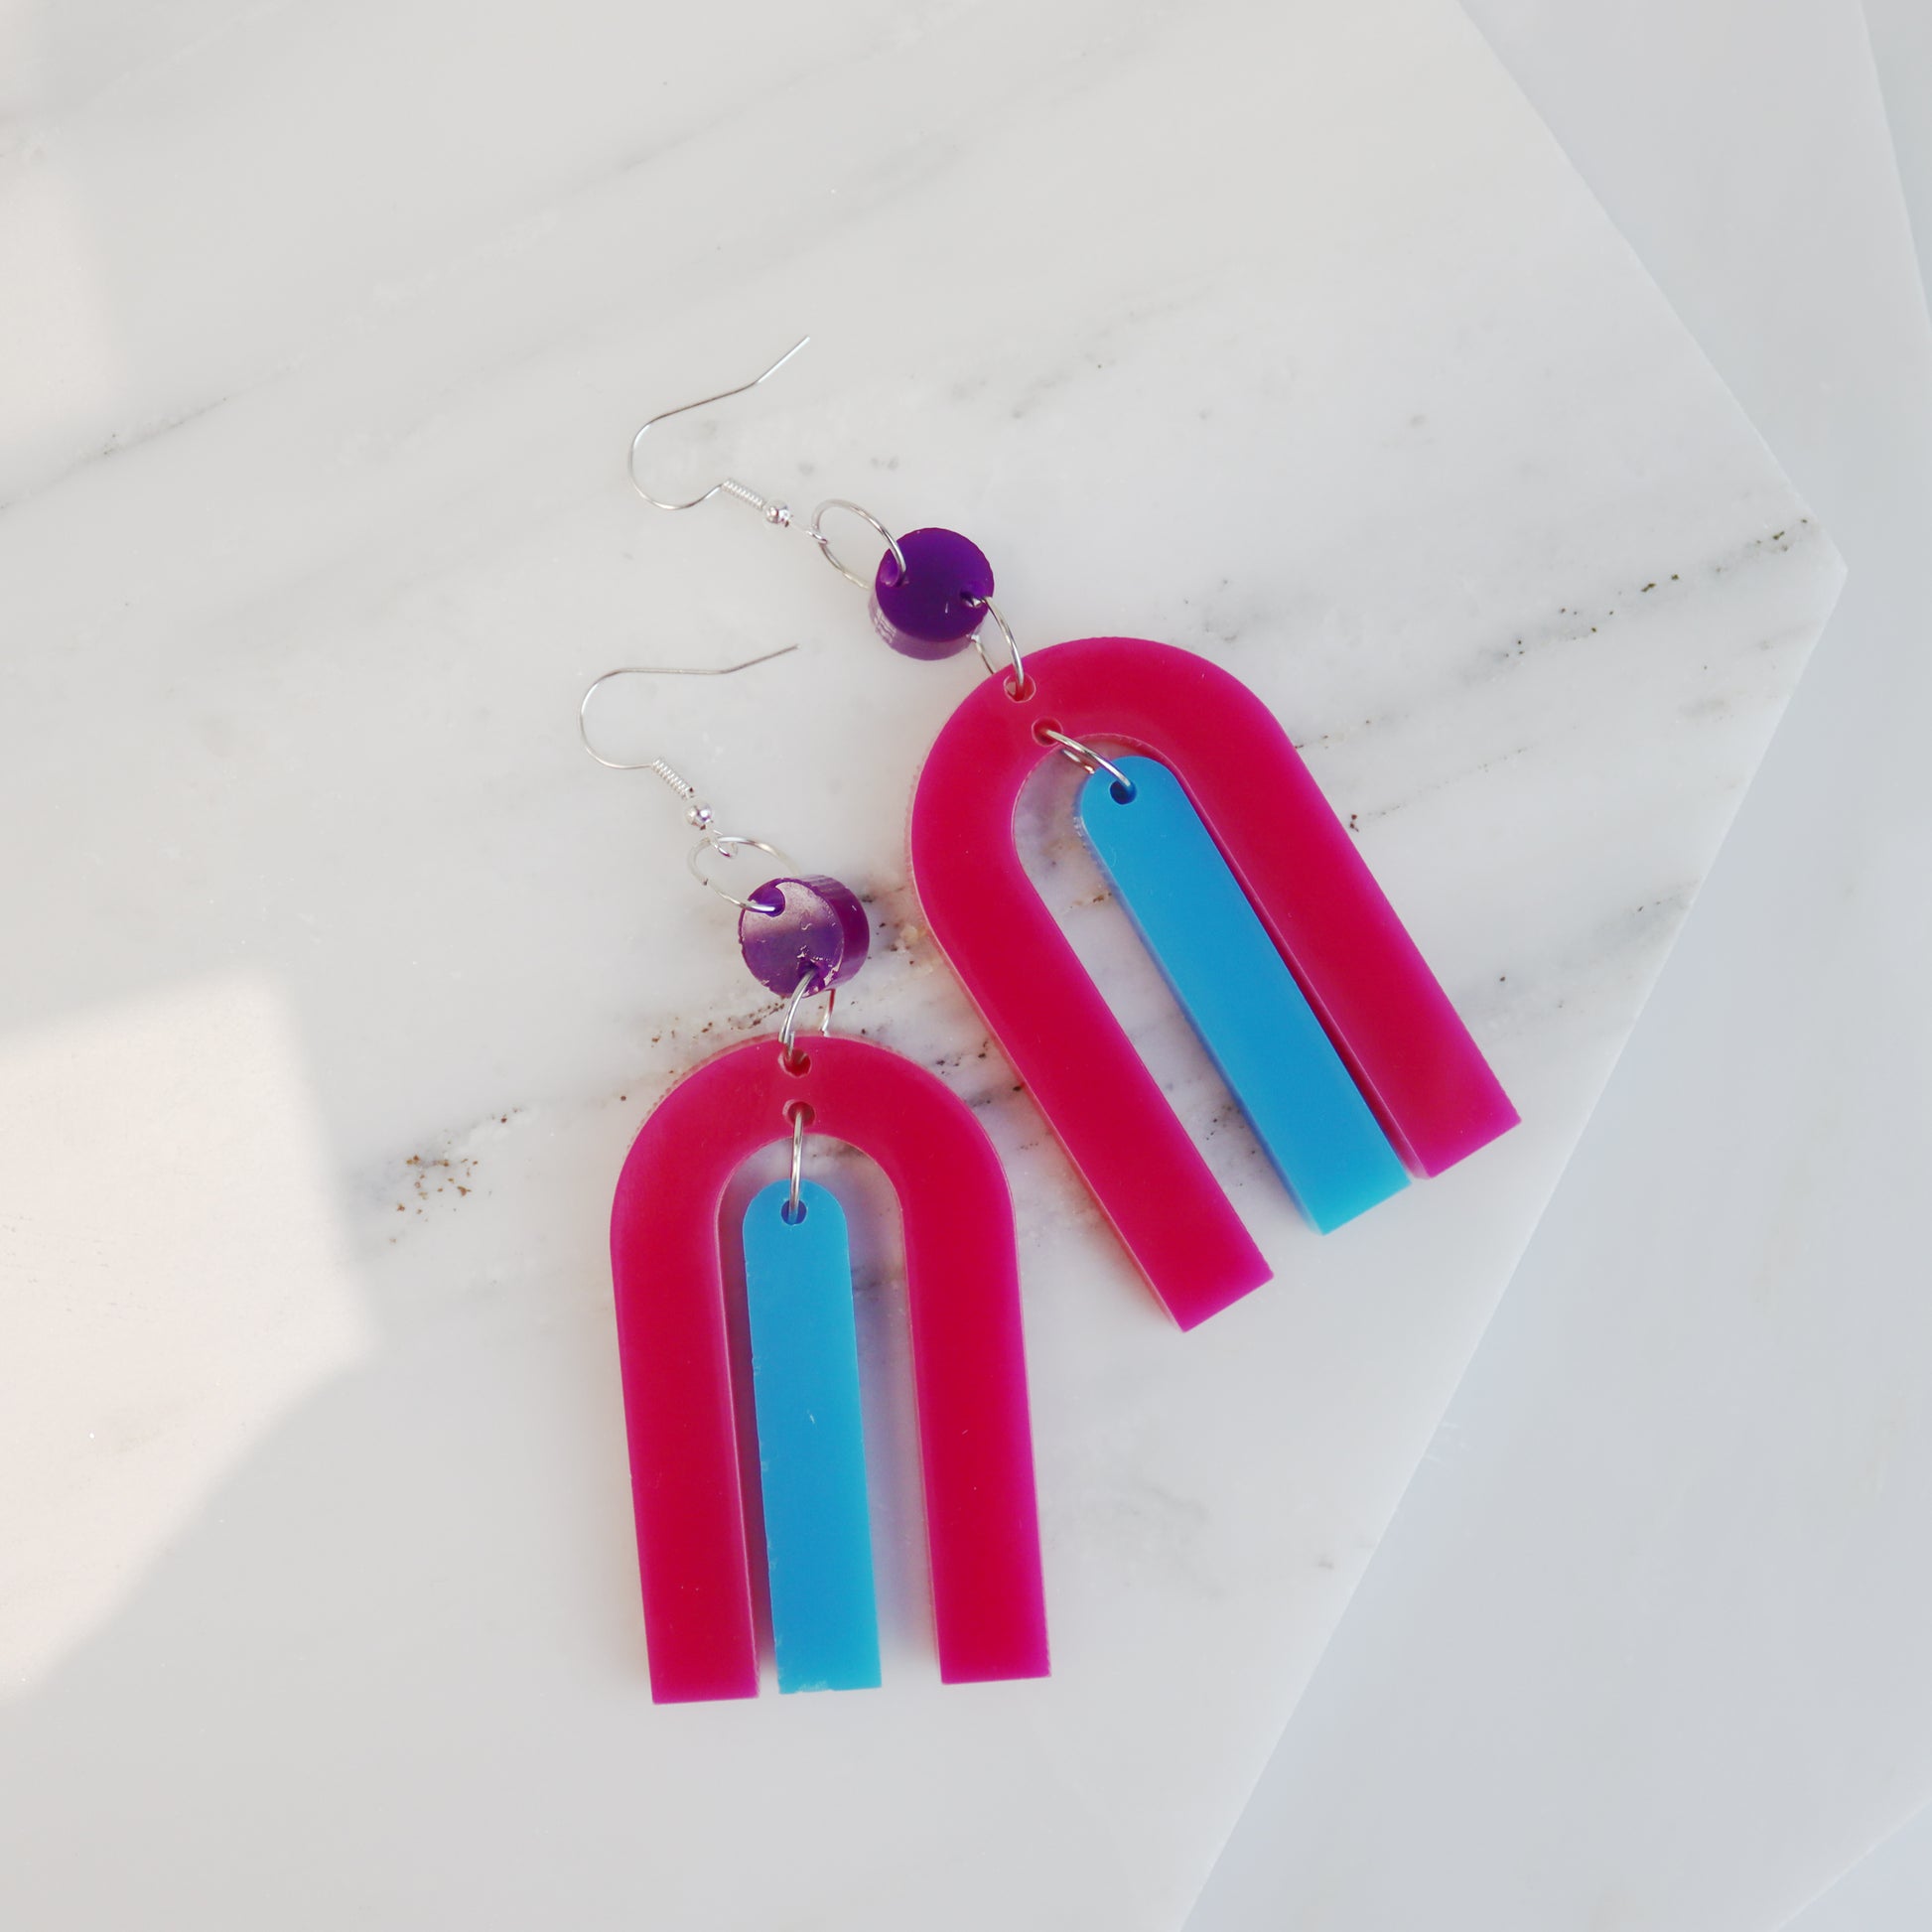 modern bright and colourful geometric arch dangle earrings cut from a purple, pink and turquoise acrylic